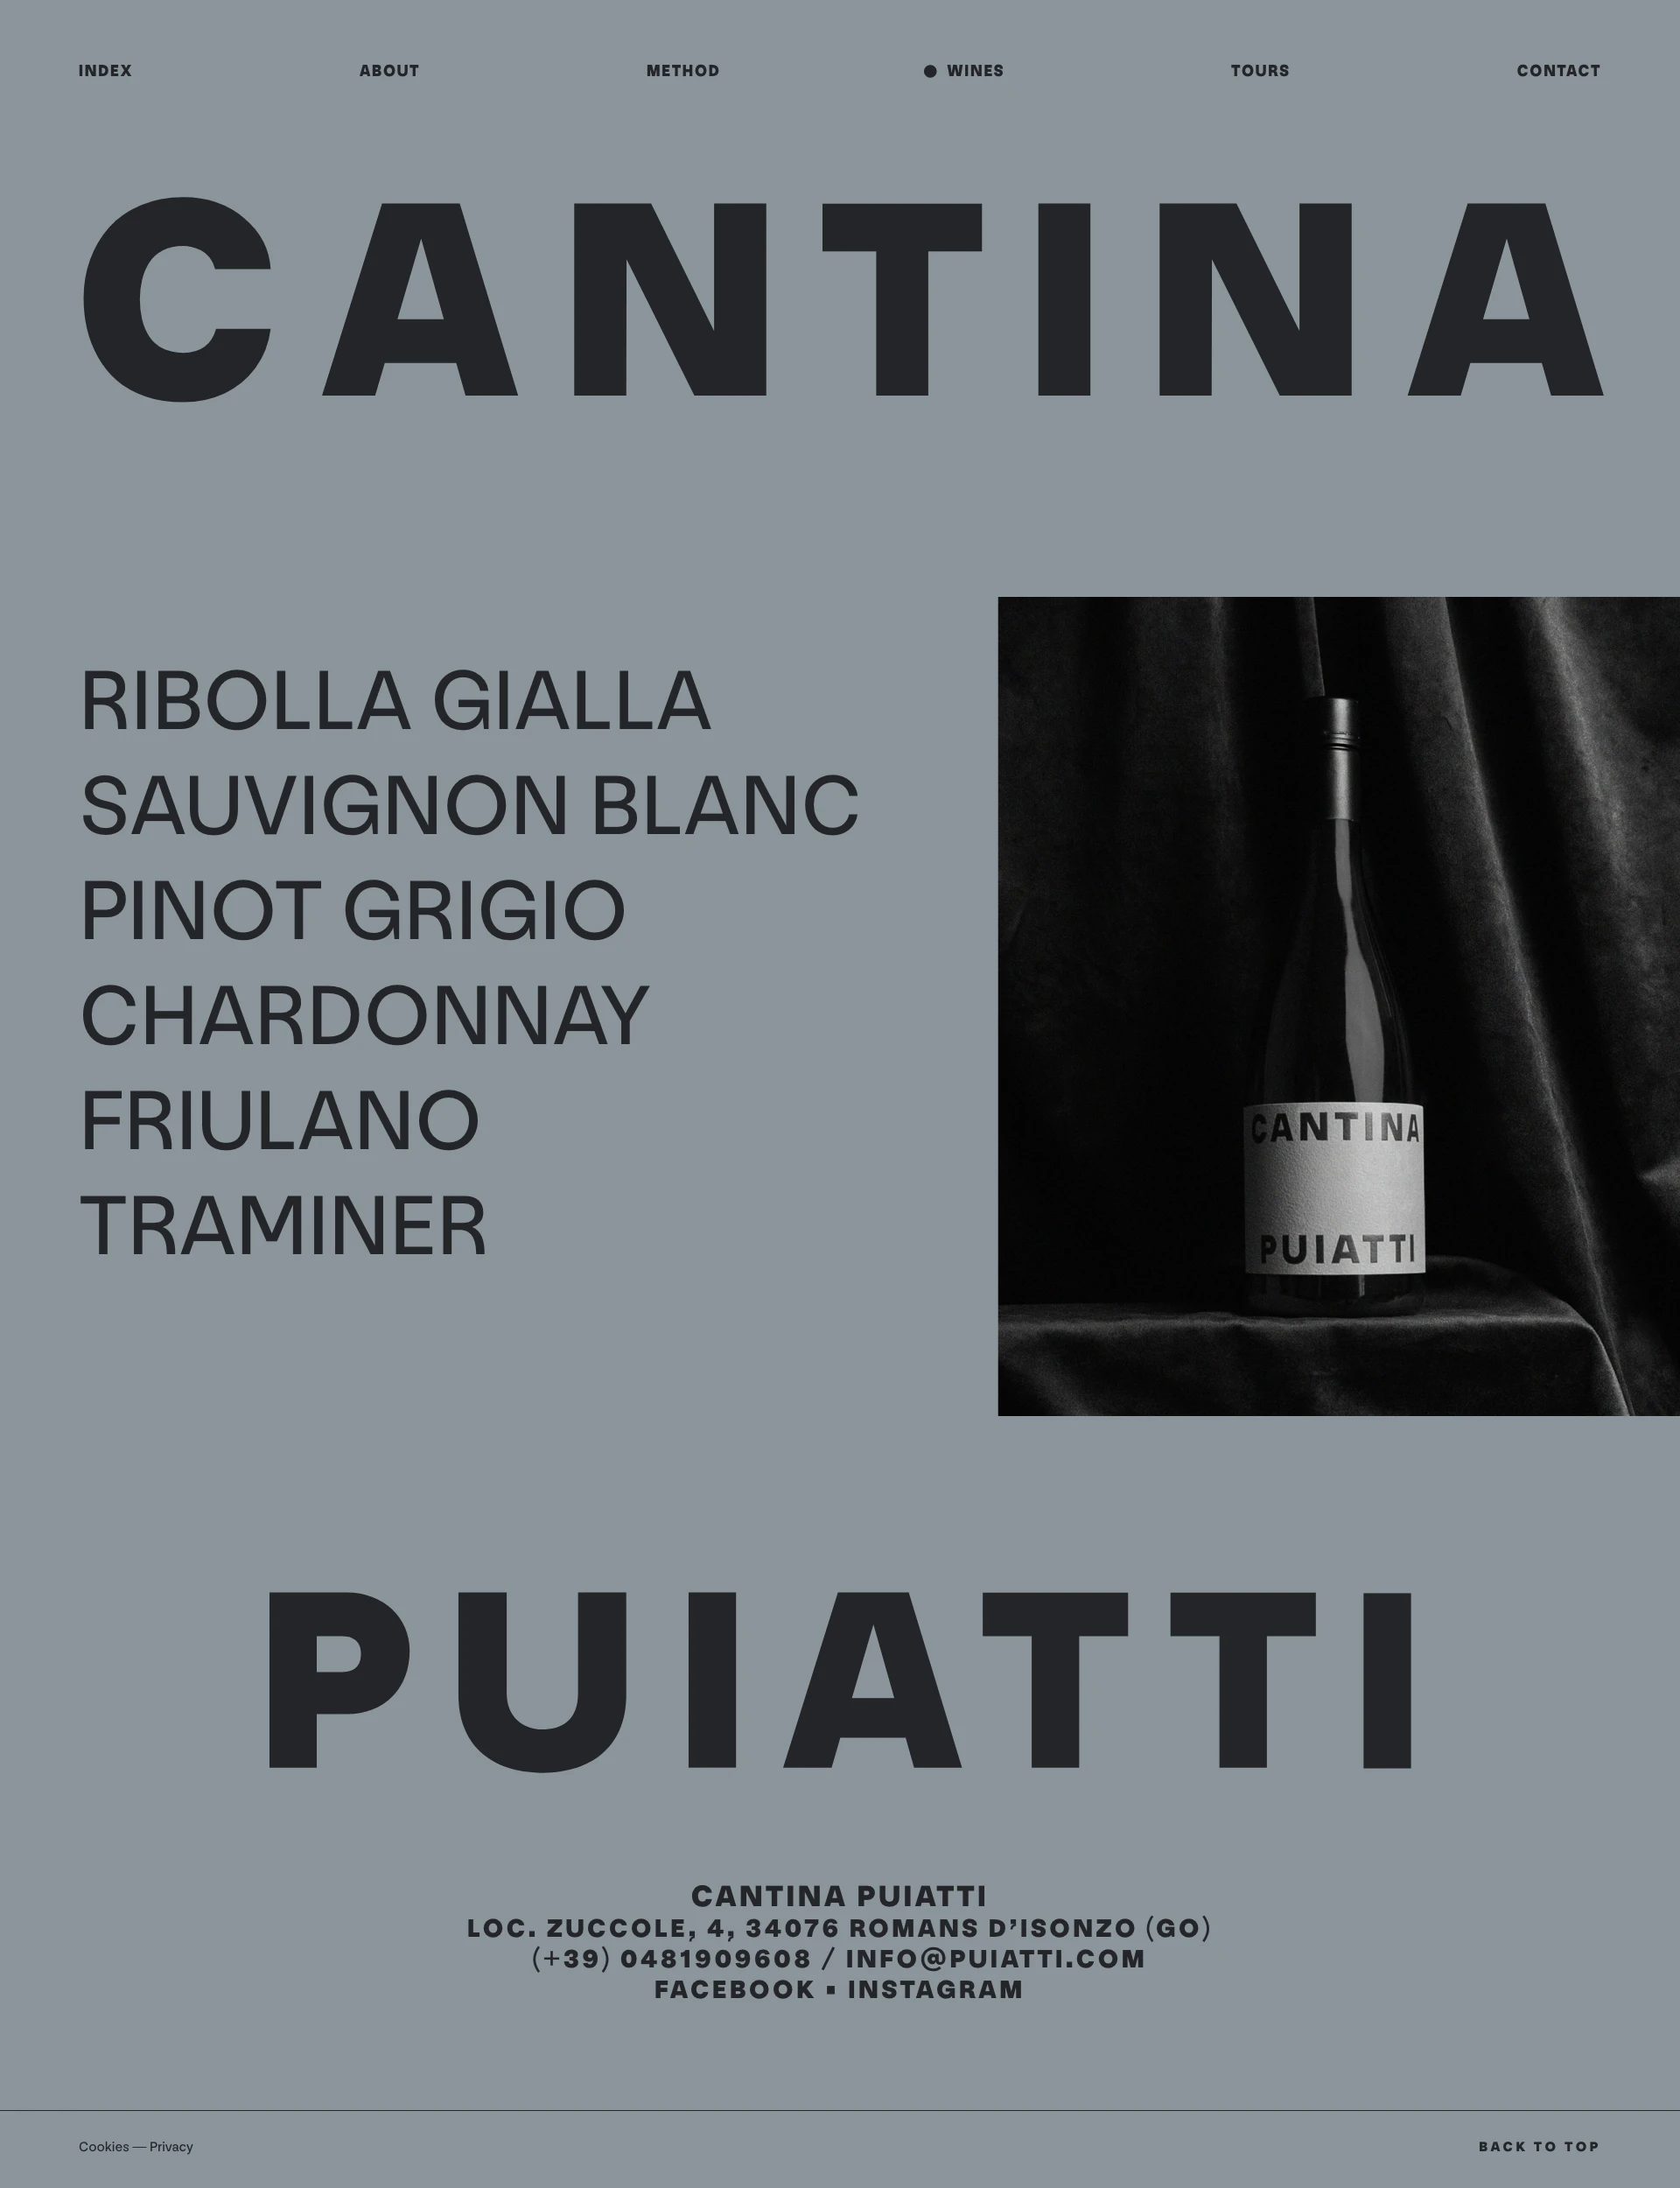 Cantina Puiatti Landing Page Example: Cantina Puiatti is the place where skill, brilliance and method meet. Since 1967, shaping the future of wine without forgetting the past.